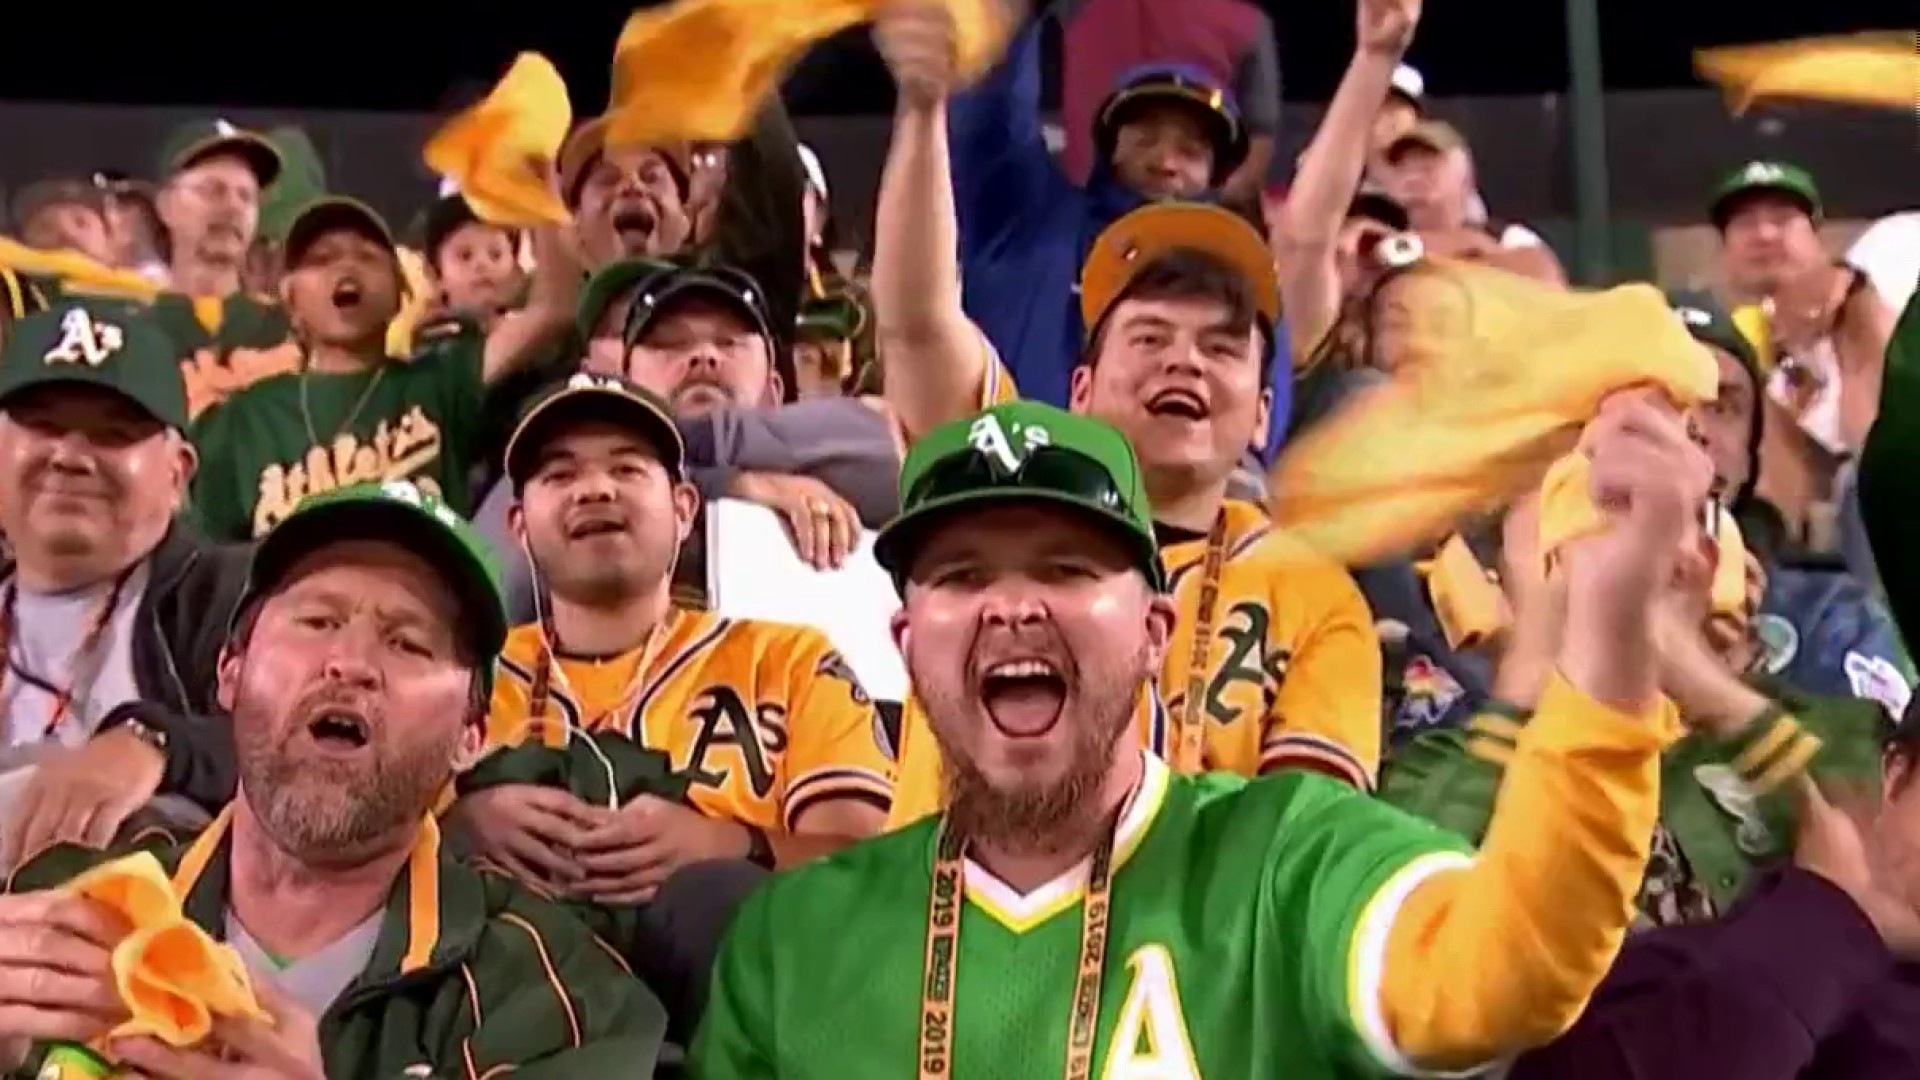 MLB edited out signs critical of Oakland A's ownership